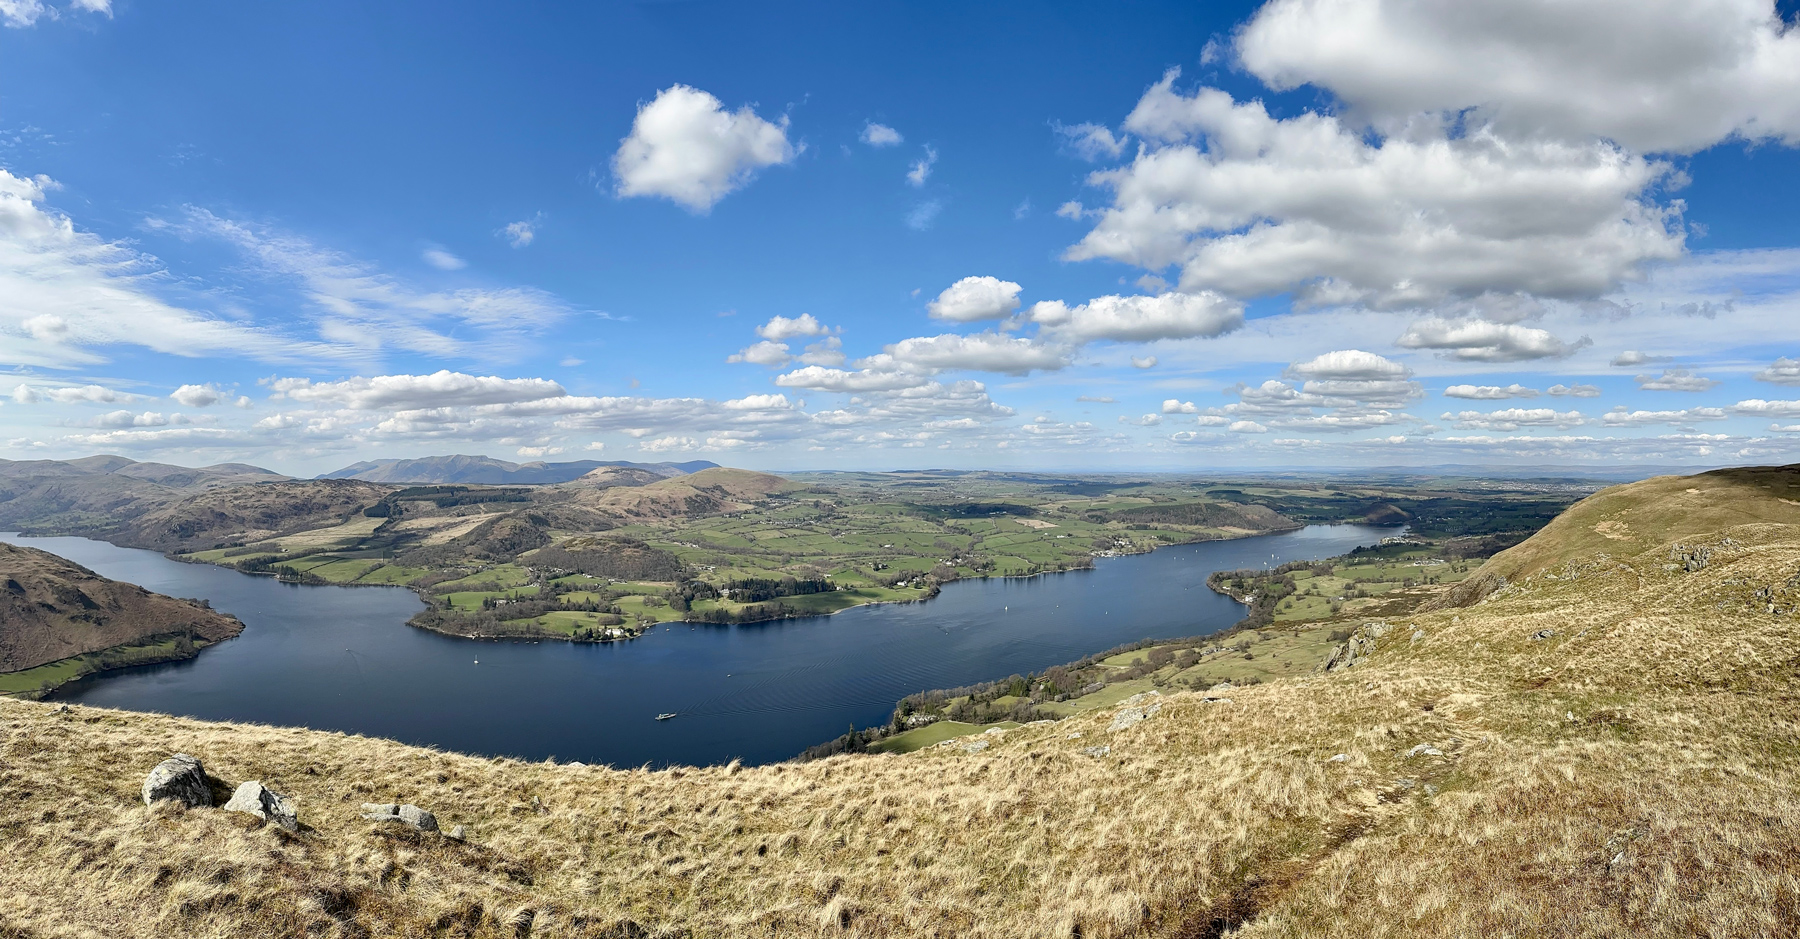 A panoramic view over Ullswater Lake from the top of our walk. The sun is shining and the sky is blue.